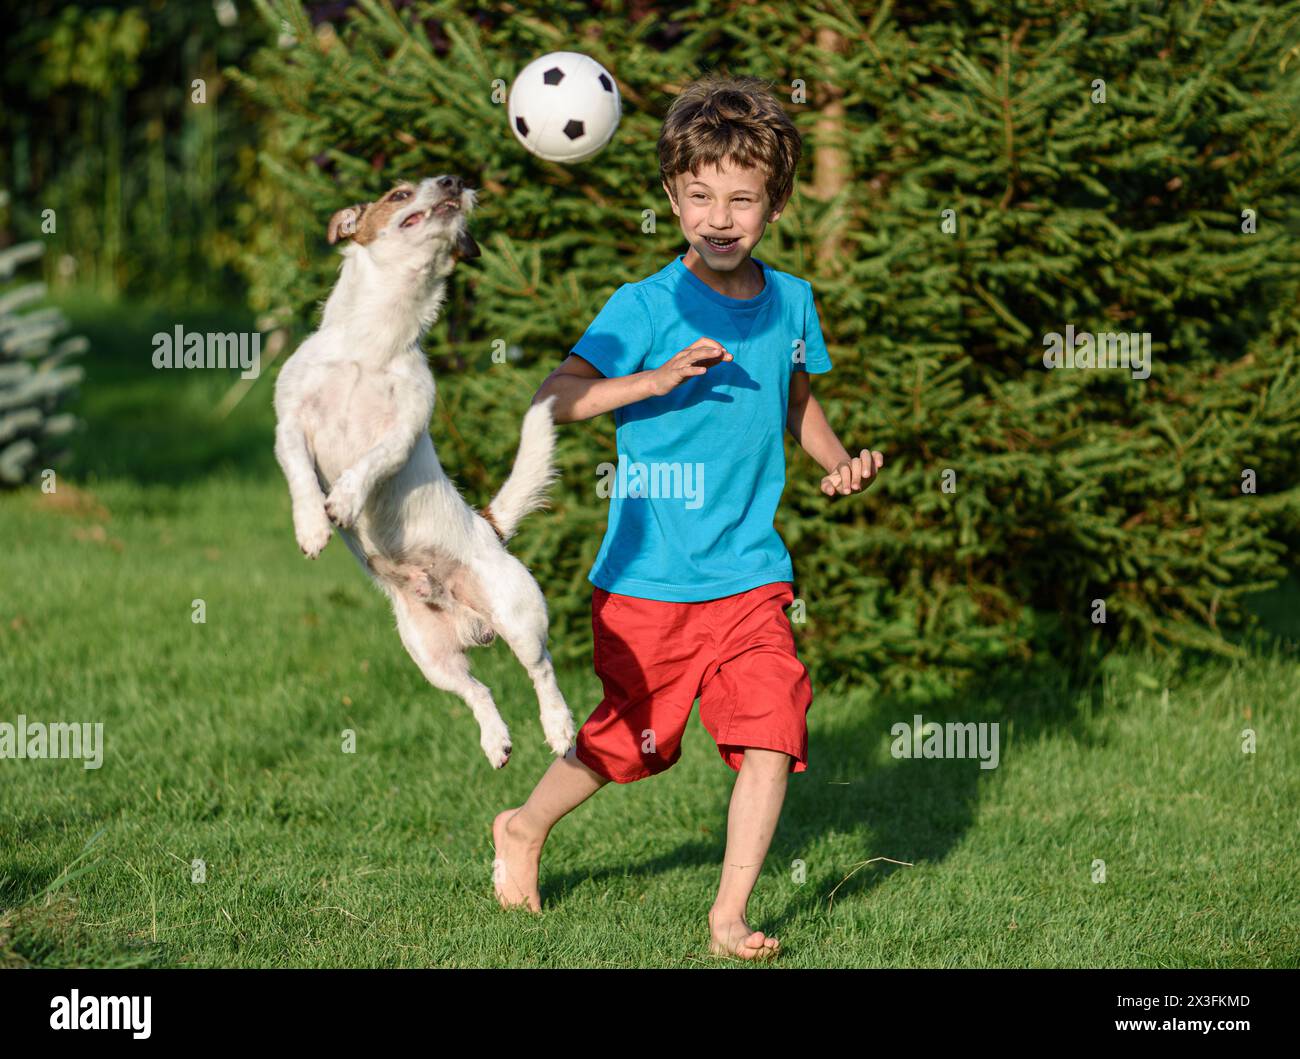 Kid playing football with family pet dog in backyard garden. Dog jumps to catch a ball. Stock Photo